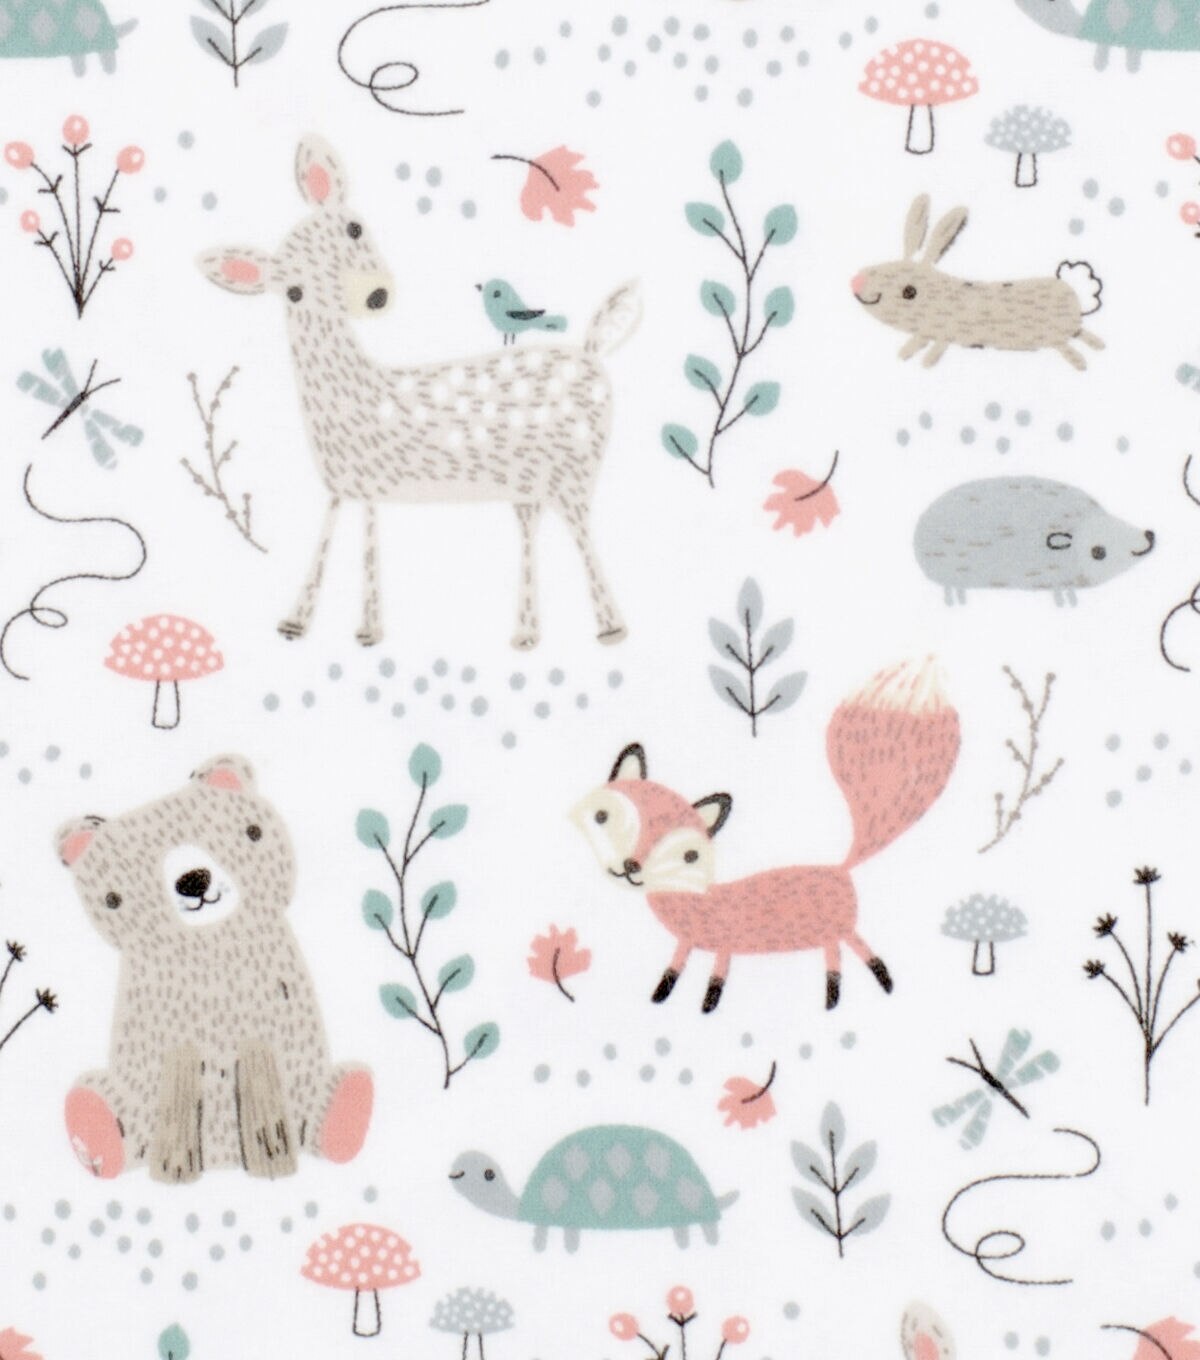 Watercolor Woodland Nursery Cotton Fabric By The Yard With Spoonflower Woodland Creatures Fabric Woodland Creatures White By Vinpauld